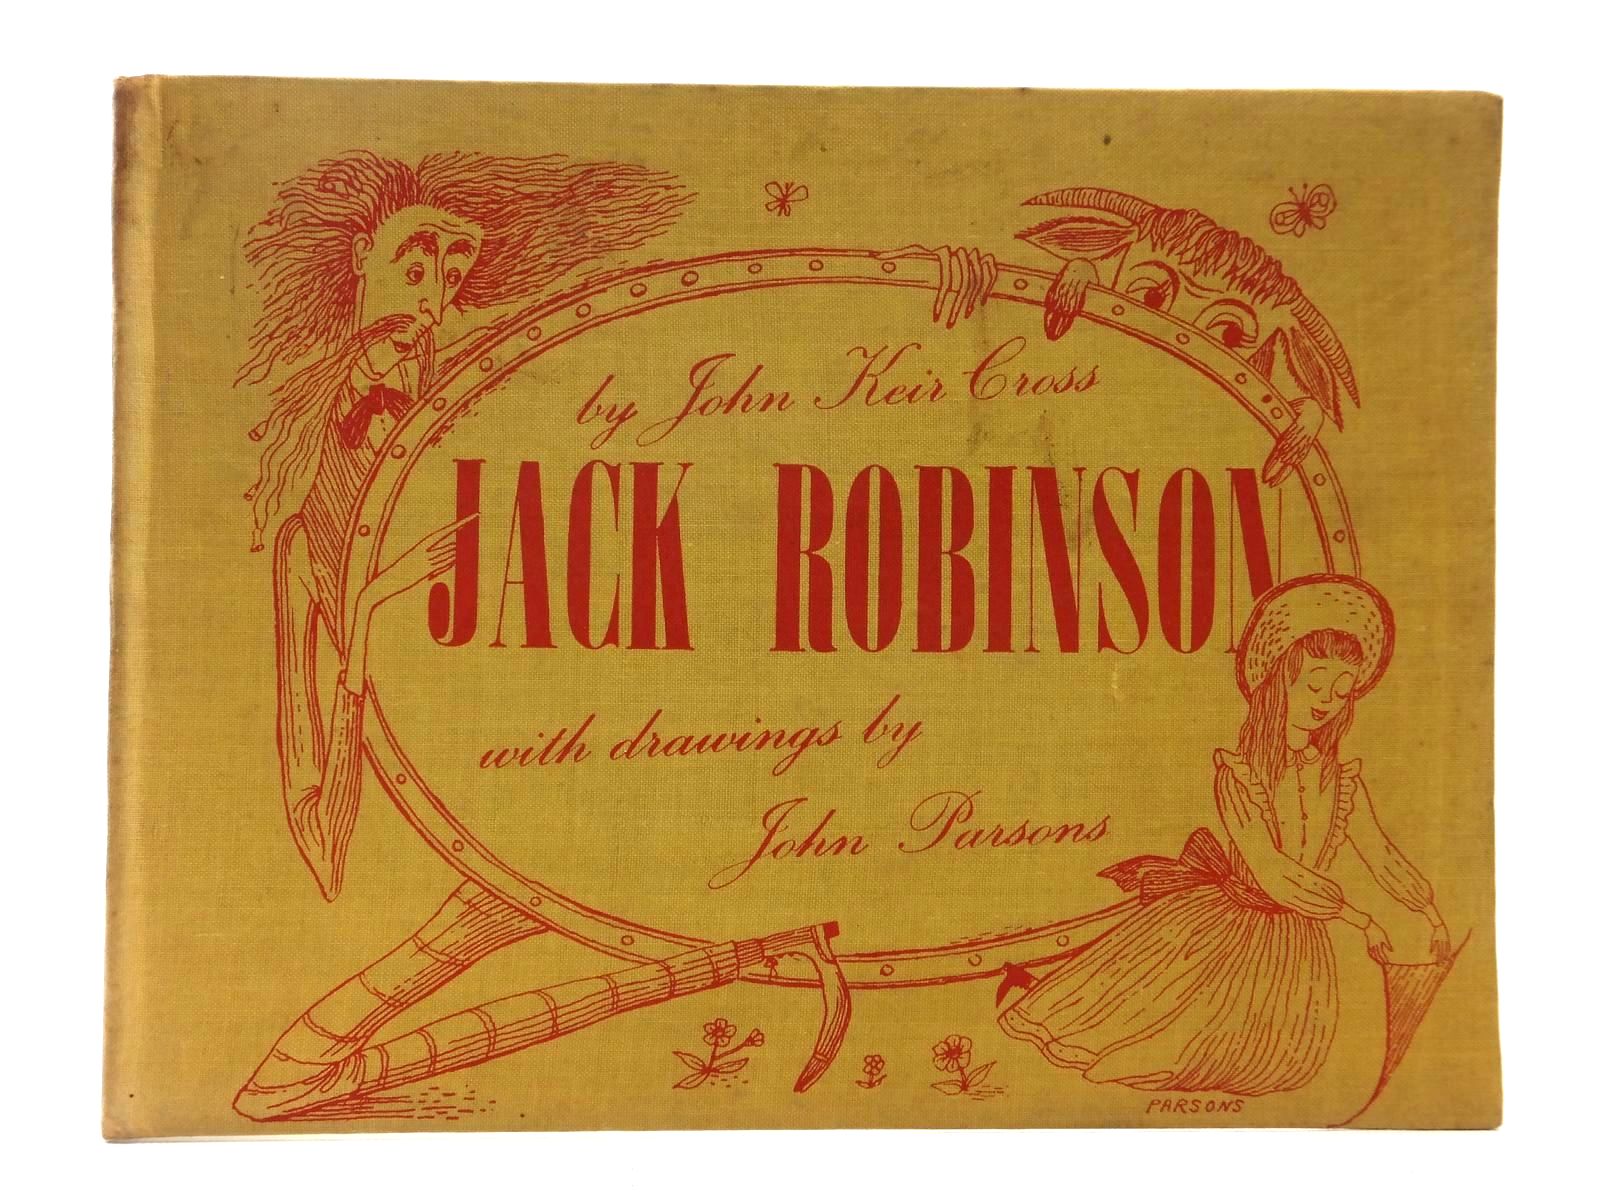 Photo of JACK ROBINSON written by Cross, J. Keir illustrated by Parsons, John R. published by Peter Lunn (STOCK CODE: 1316944)  for sale by Stella & Rose's Books